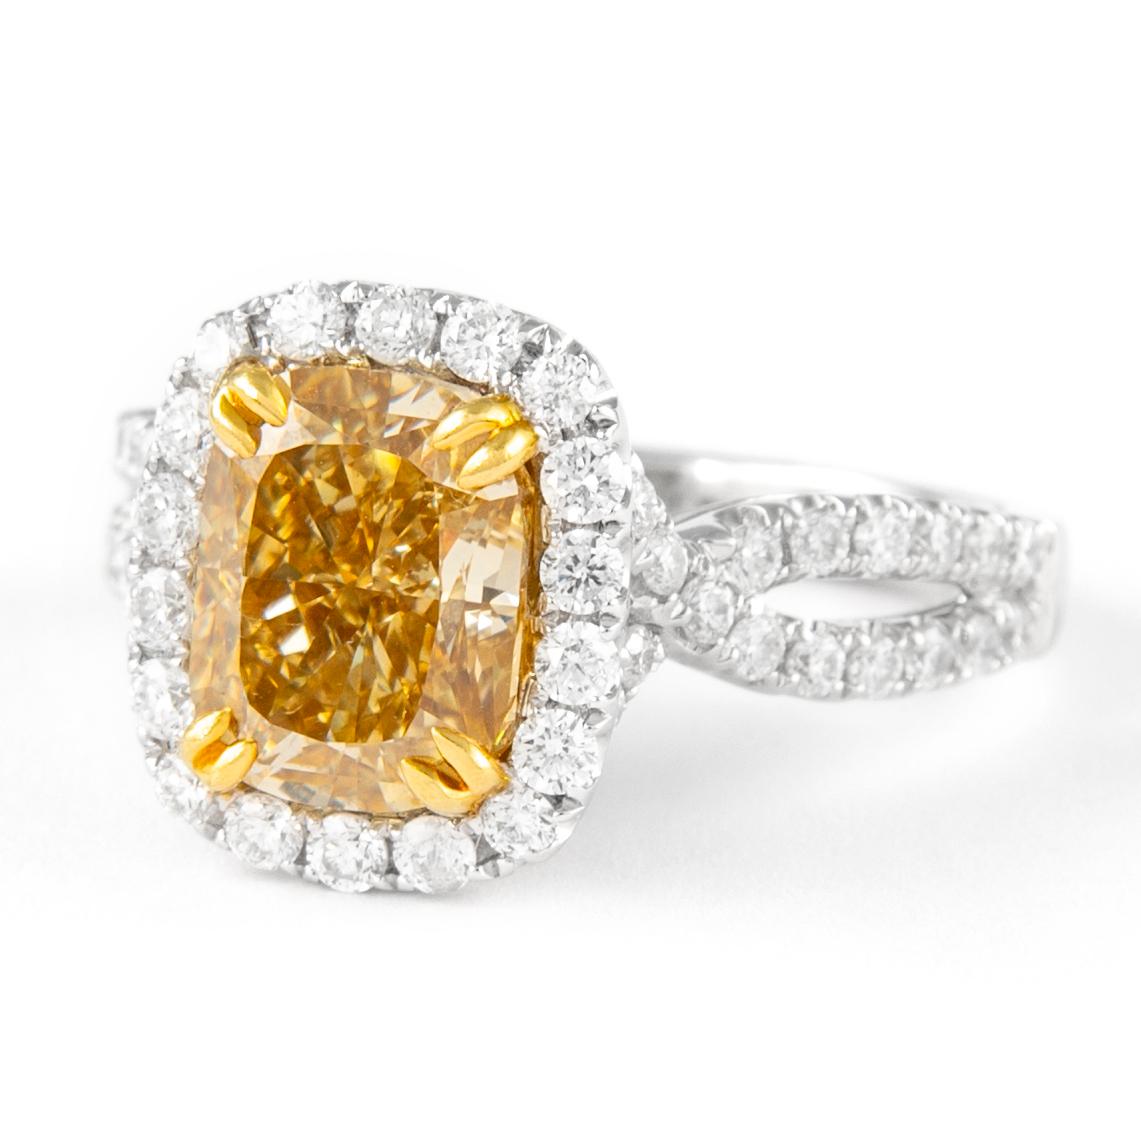 Contemporary Alexander 3.07ct Fancy Yellow VS2 Cushion Diamond with Halo Ring 18k Two Tone For Sale